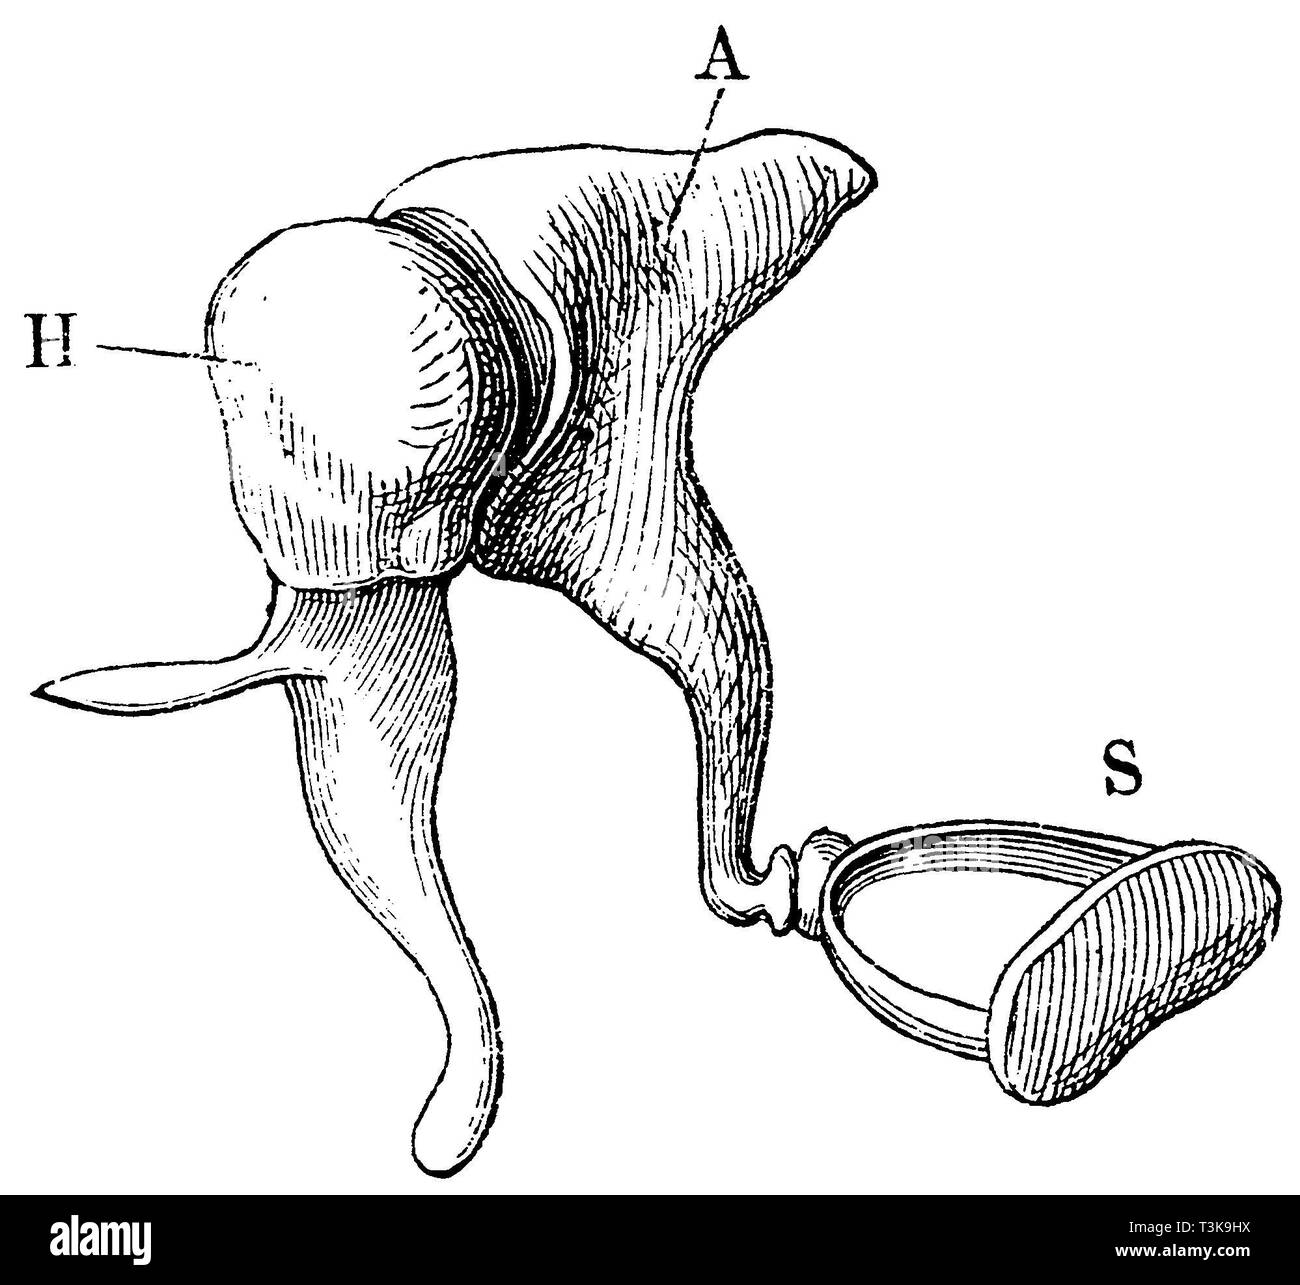 Human: Auditory ossicles of a right ear in mutual connection, seen from the front. H Hammer; A Ambos; S Stirrup, anonym Stock Photo